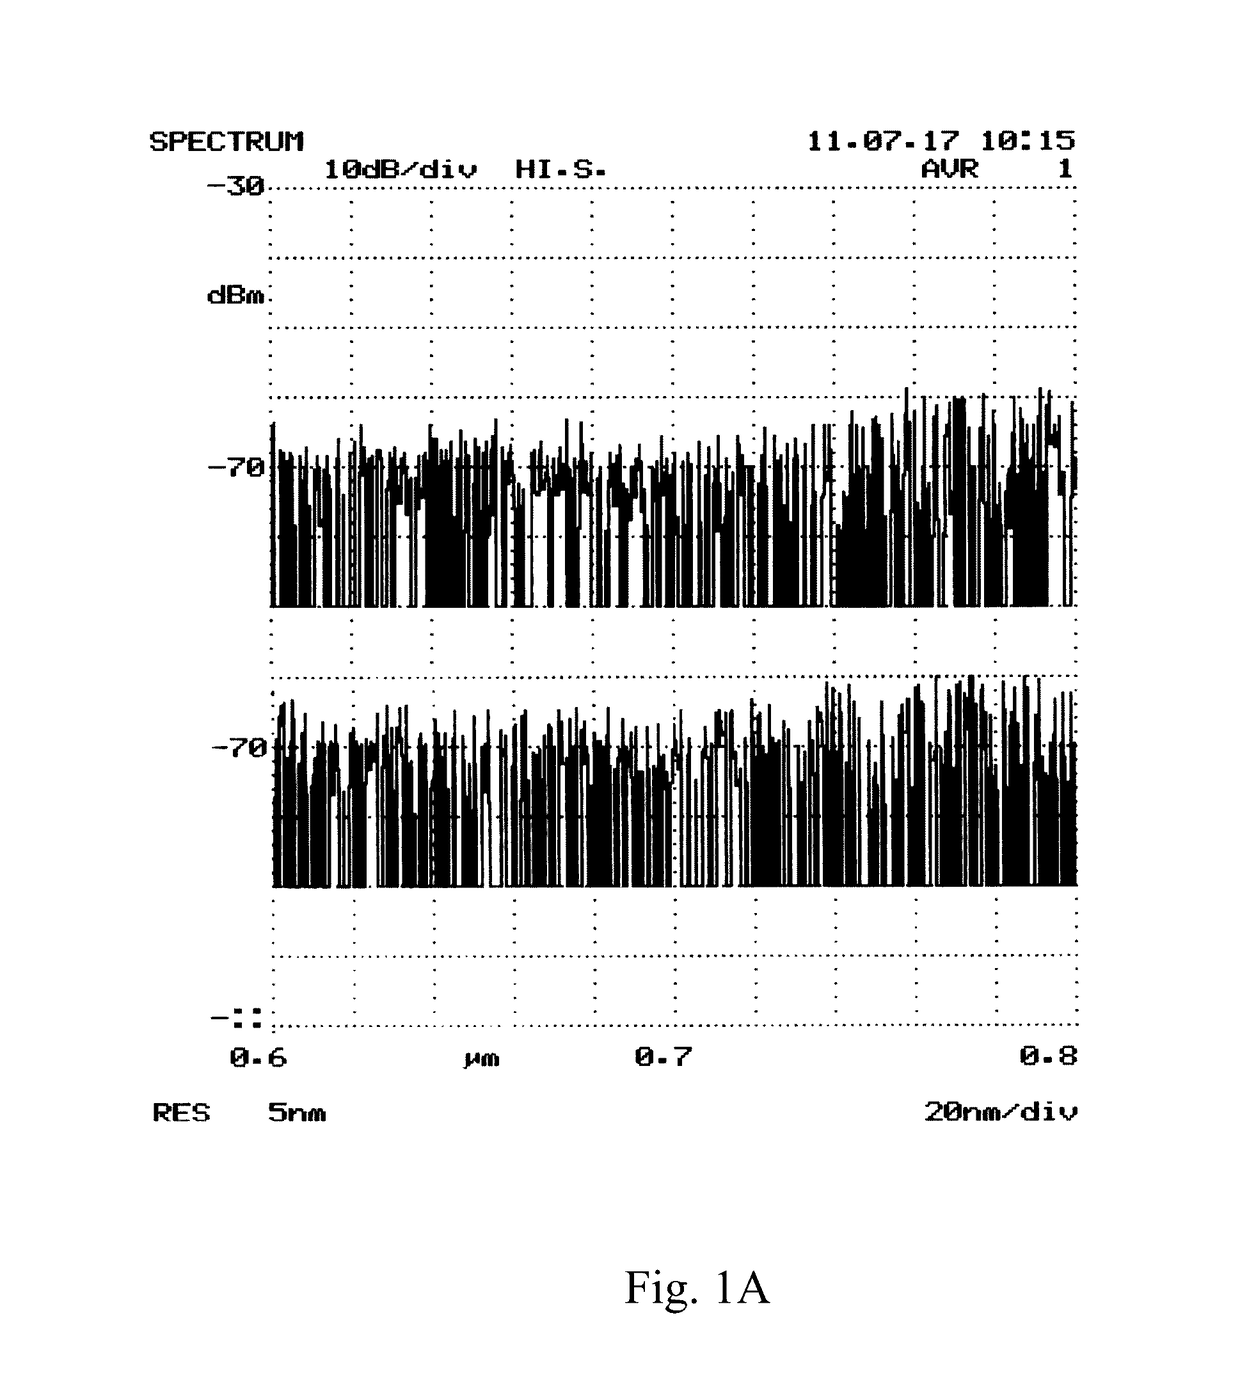 System and method for non-invasive glucose monitoring using near infrared spectroscopy